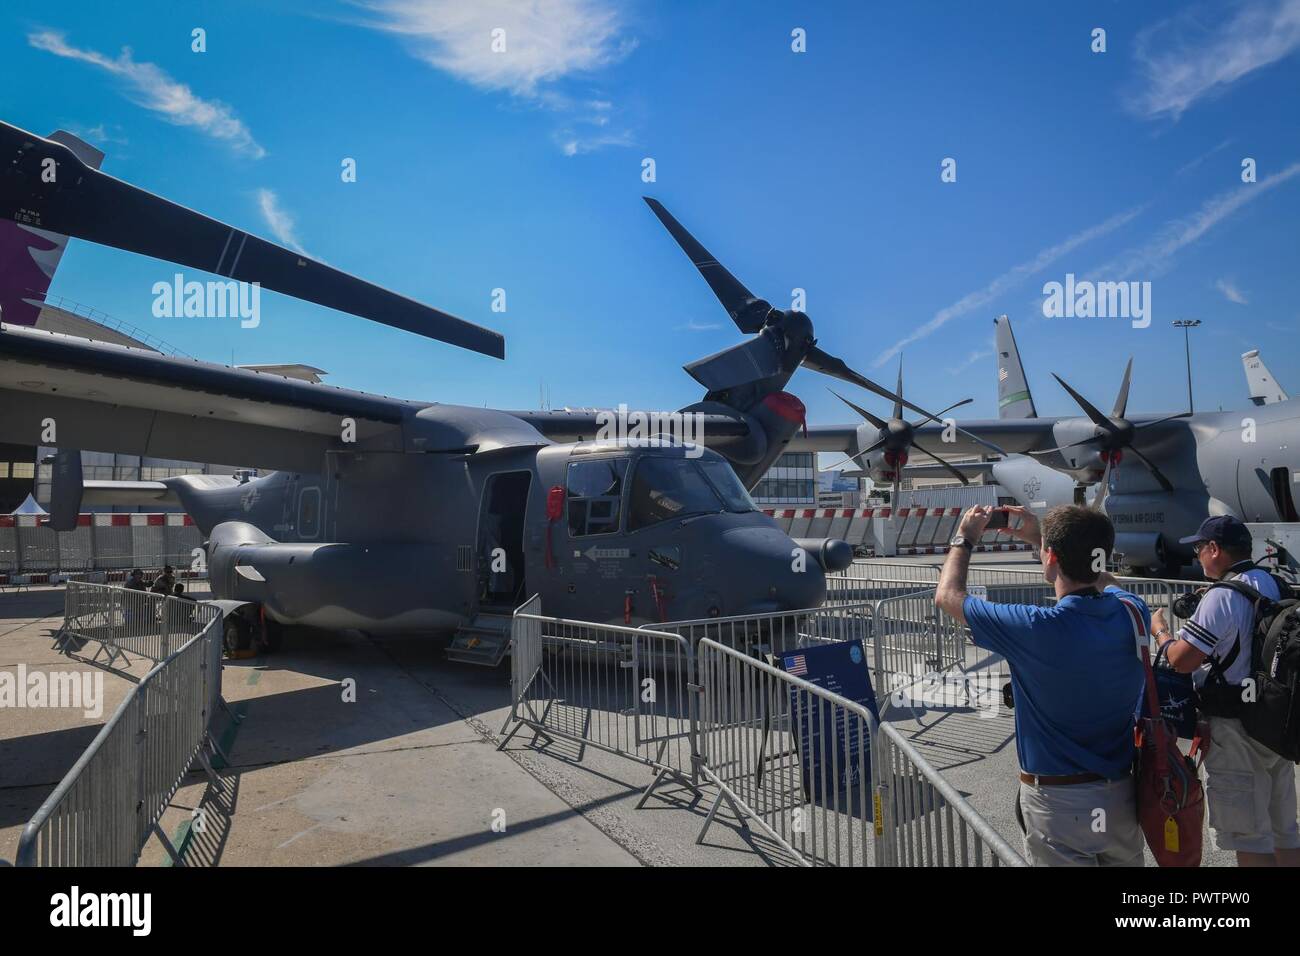 A CV-22 Osprey from the 352nd Special Operations Wing, Royal Air Force Mildenhall, is displayed in the U.S. corral at the Paris Air Show June 20, 2017 at Le Bourget, France. Aside from the CV-22, the U.S. is displaying an F-35A Lightning II, an F-16 Fighting Falcon, a CH-47 Chinook, an AH-64 Apache, a P-8 Poseidon, and a C-130J Super Hercules. The Paris Air Show offers the U.S. a unique opportunity to display their leadership in aerospeace and technology on an international scale. Stock Photo